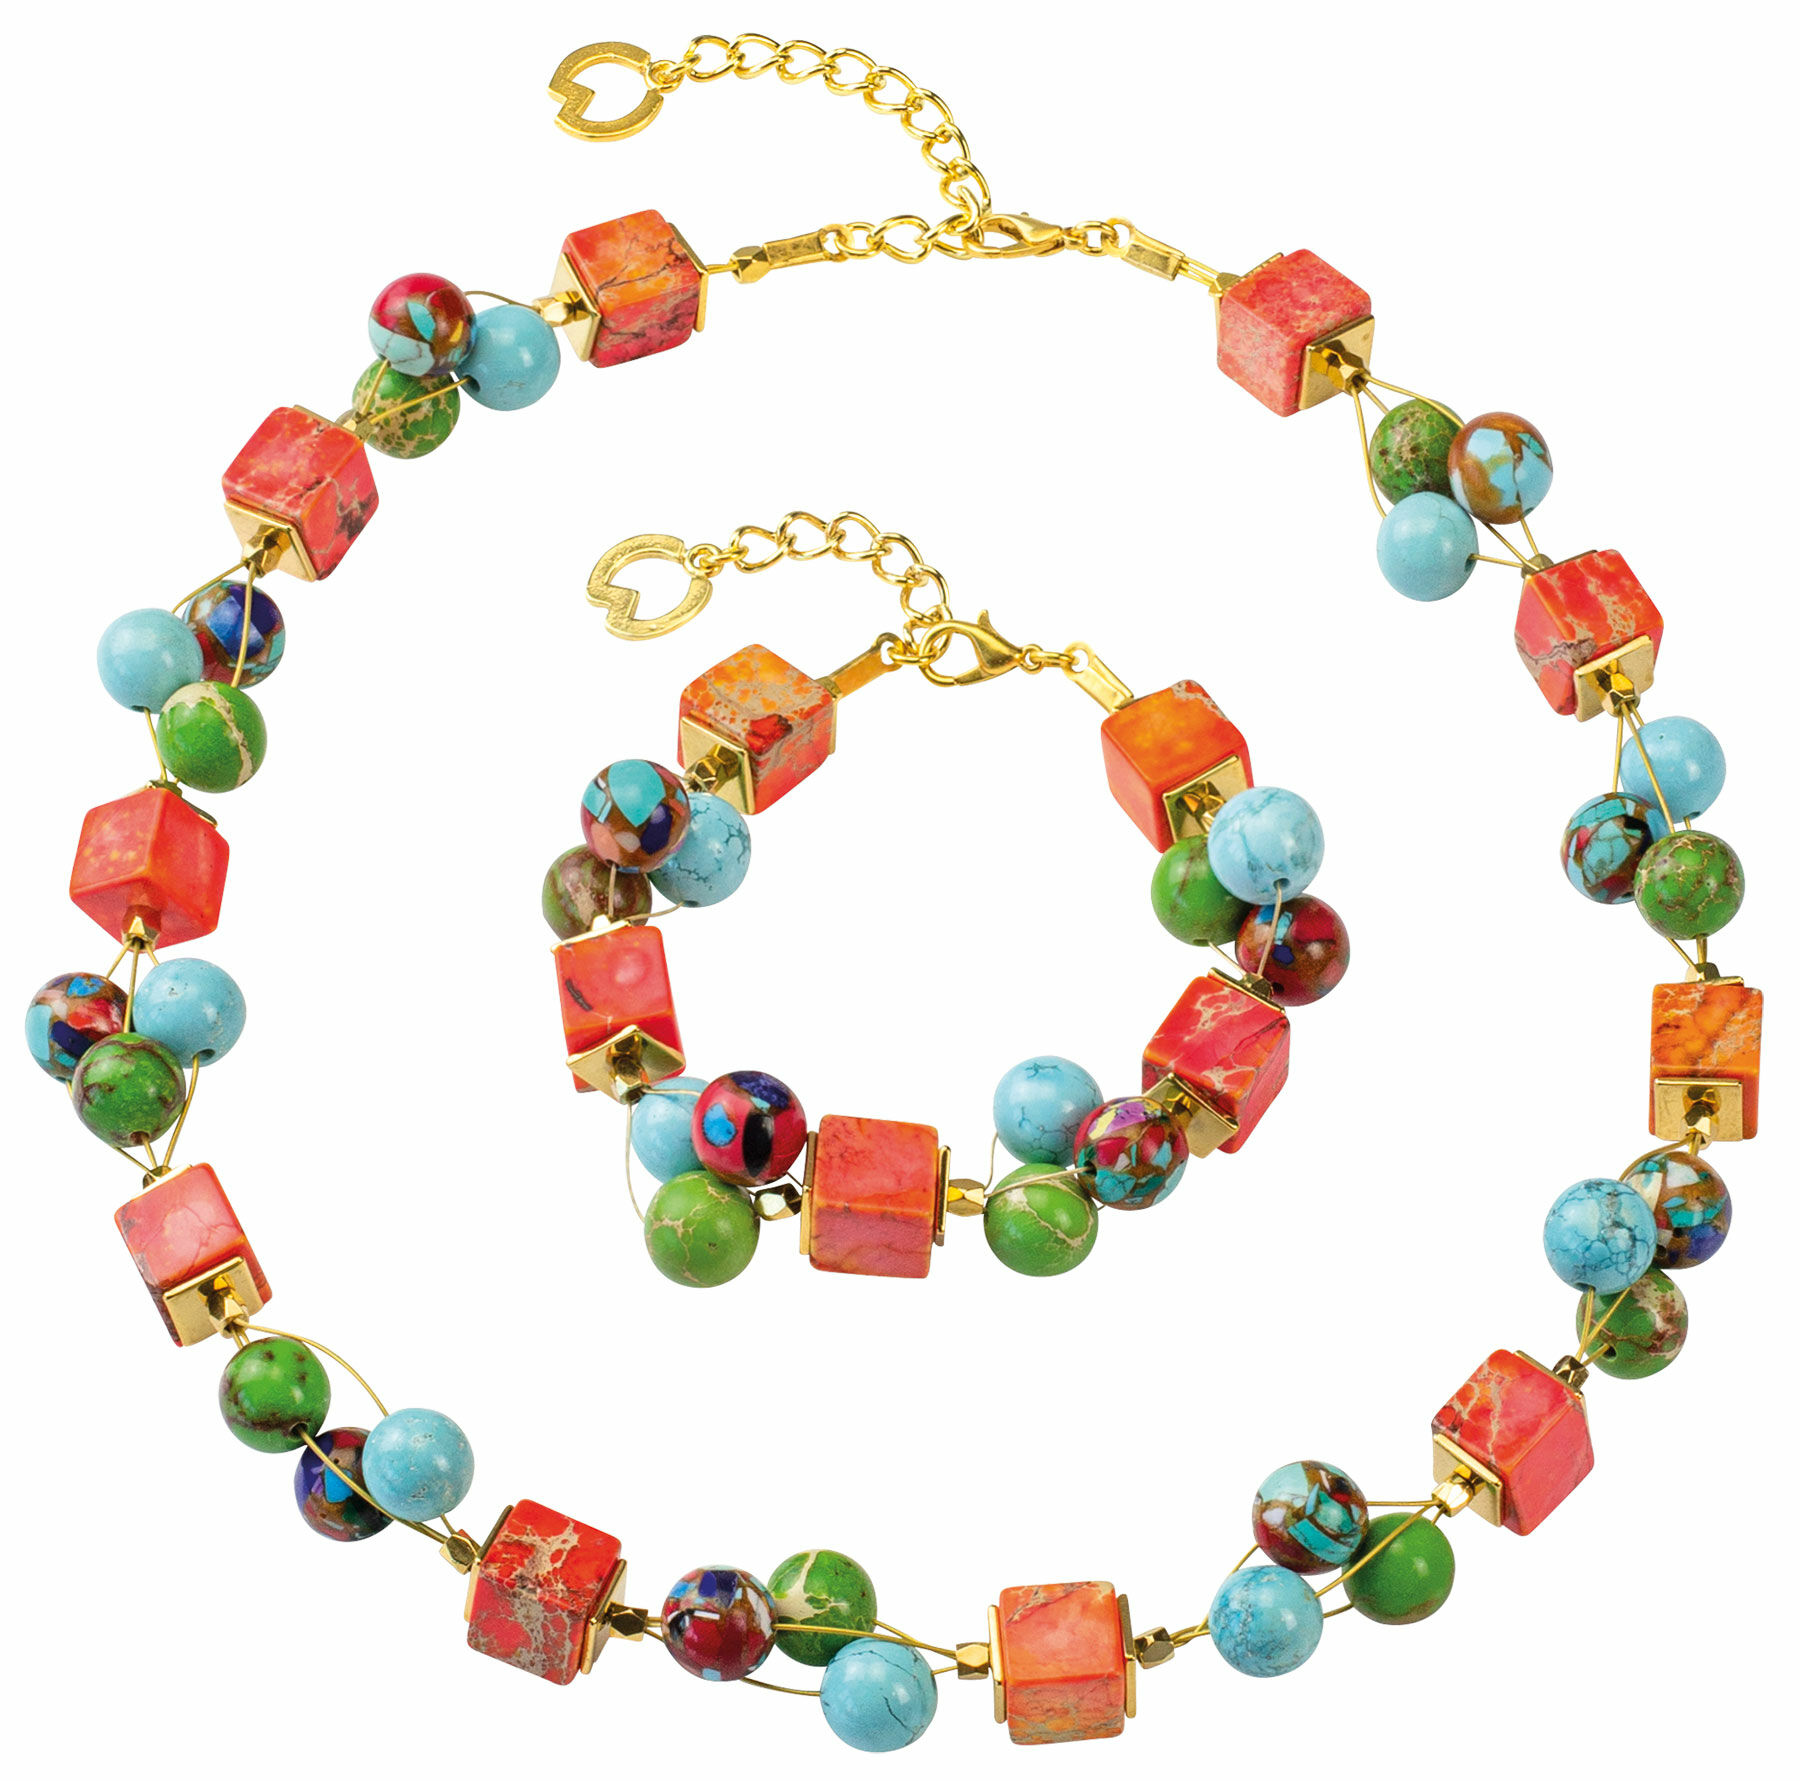 Jewellery set "Highway and Byways" - after Paul Klee by Petra Waszak